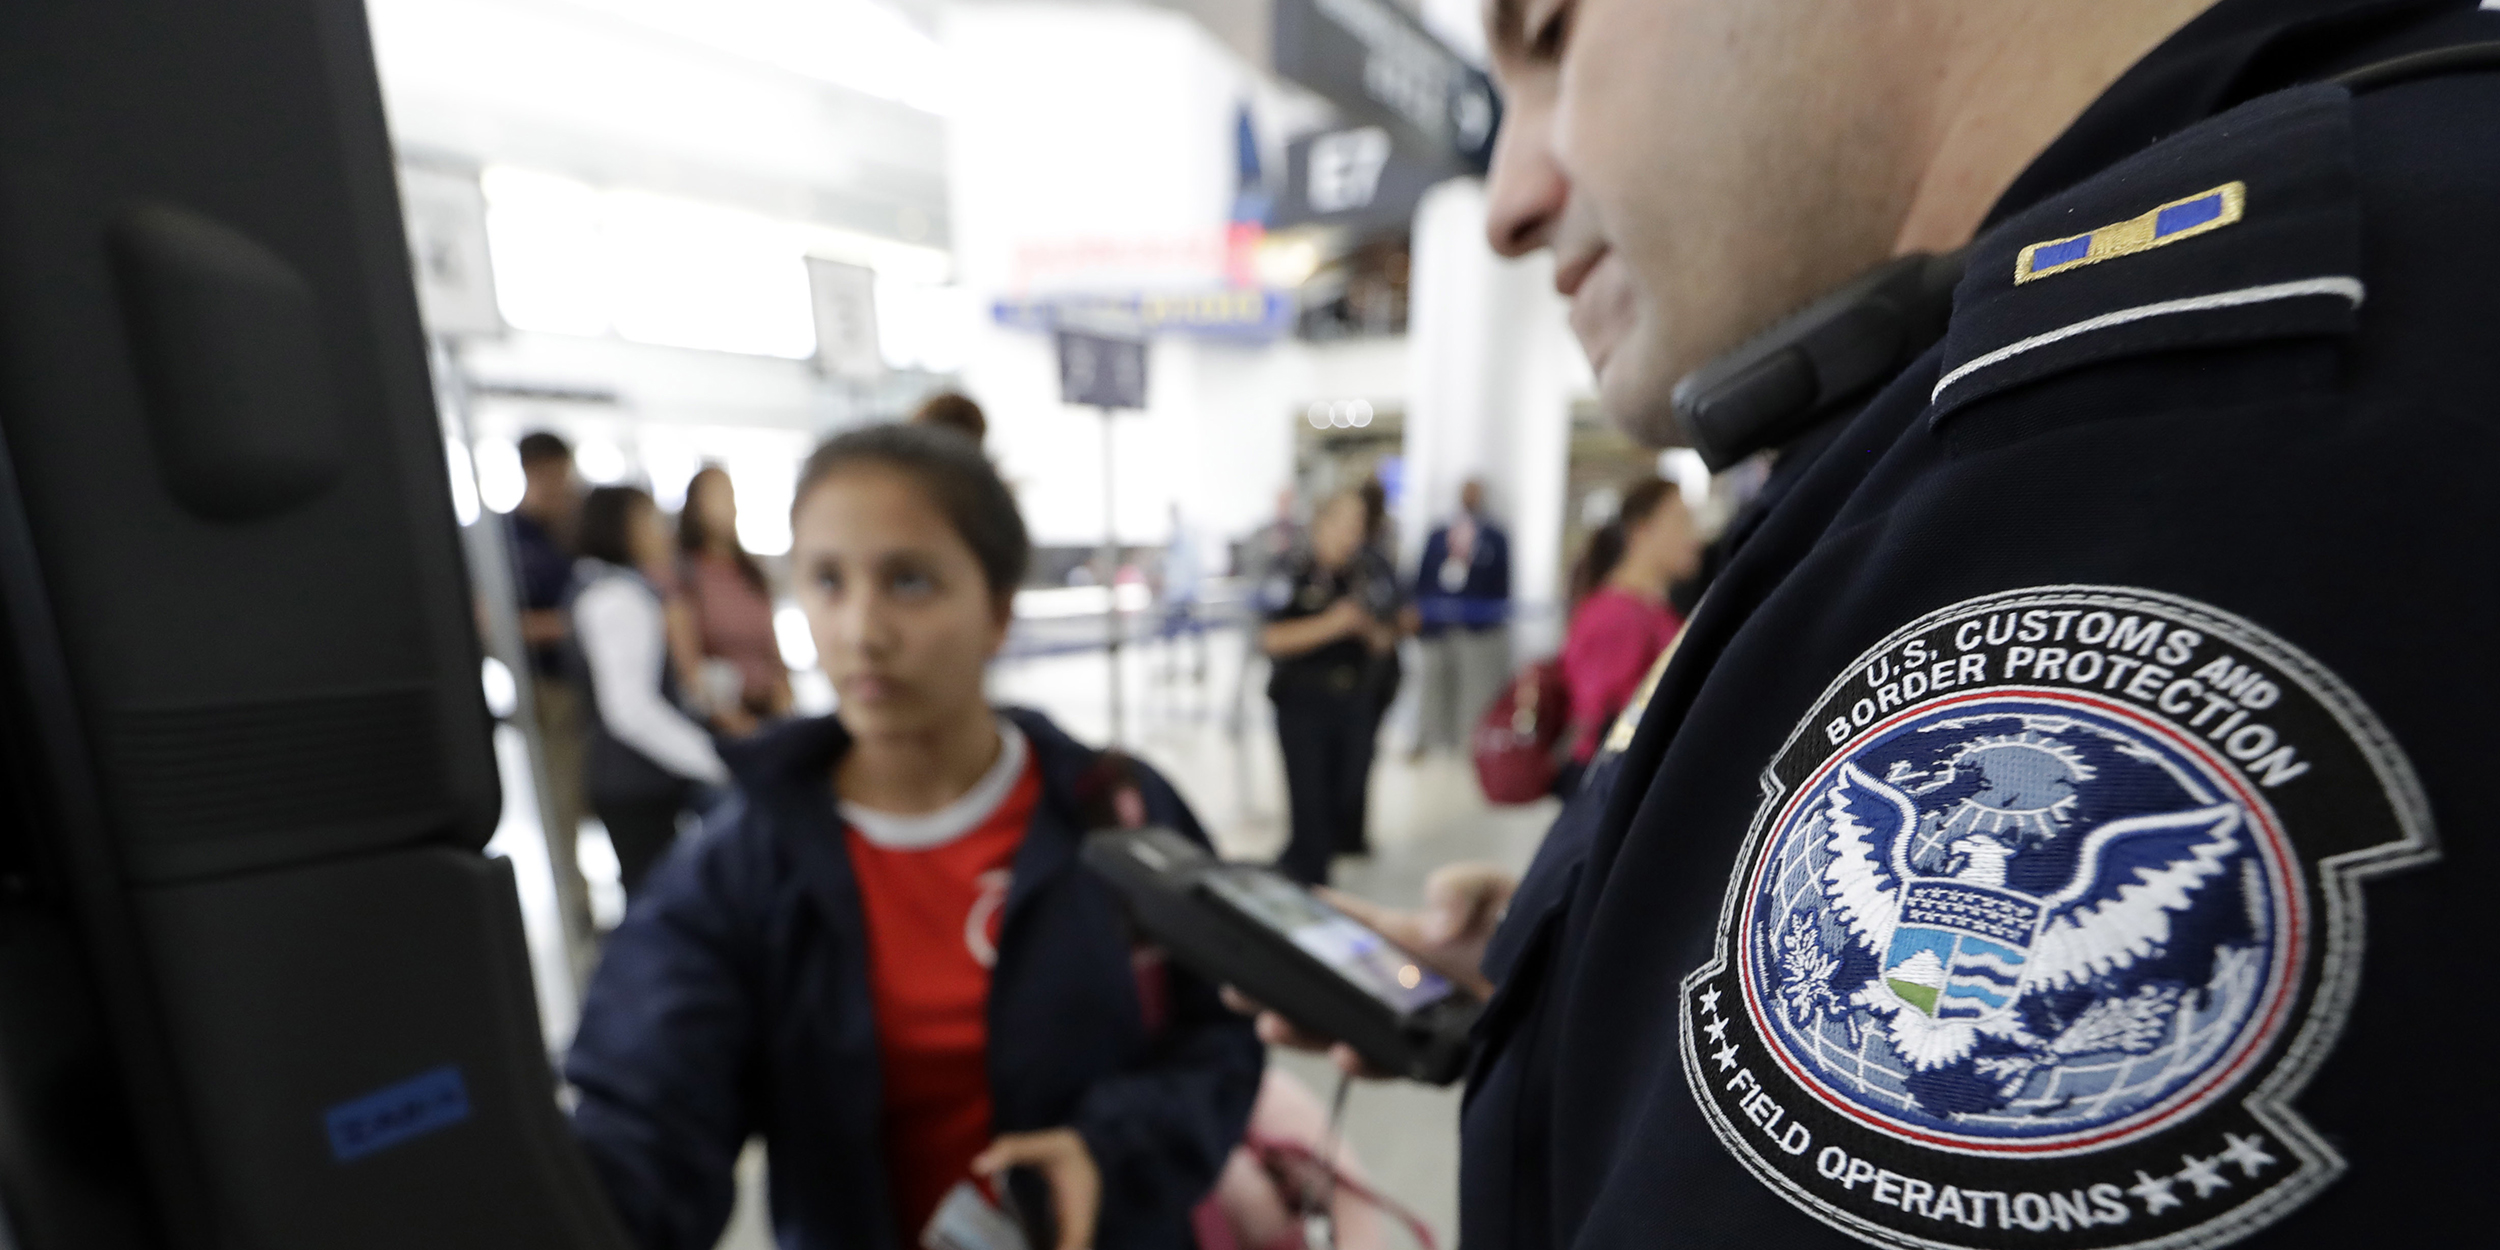 U.S. Customs and Border Protection officer Julio Corro, right, helps a passenger navigate one of the new facial recognition kiosks at a United Airlines gate before boarding a flight to Tokyo, Wednesday, July 12, 2017, at George Bush Intercontinental Airport, in Houston. The Trump administration intends to require that American citizens boarding international flights submit to face scans, something Congress has not explicitly approved and privacy advocates consider an ill-advised step toward a surveillance state. (AP Photo/David J. Phillip)